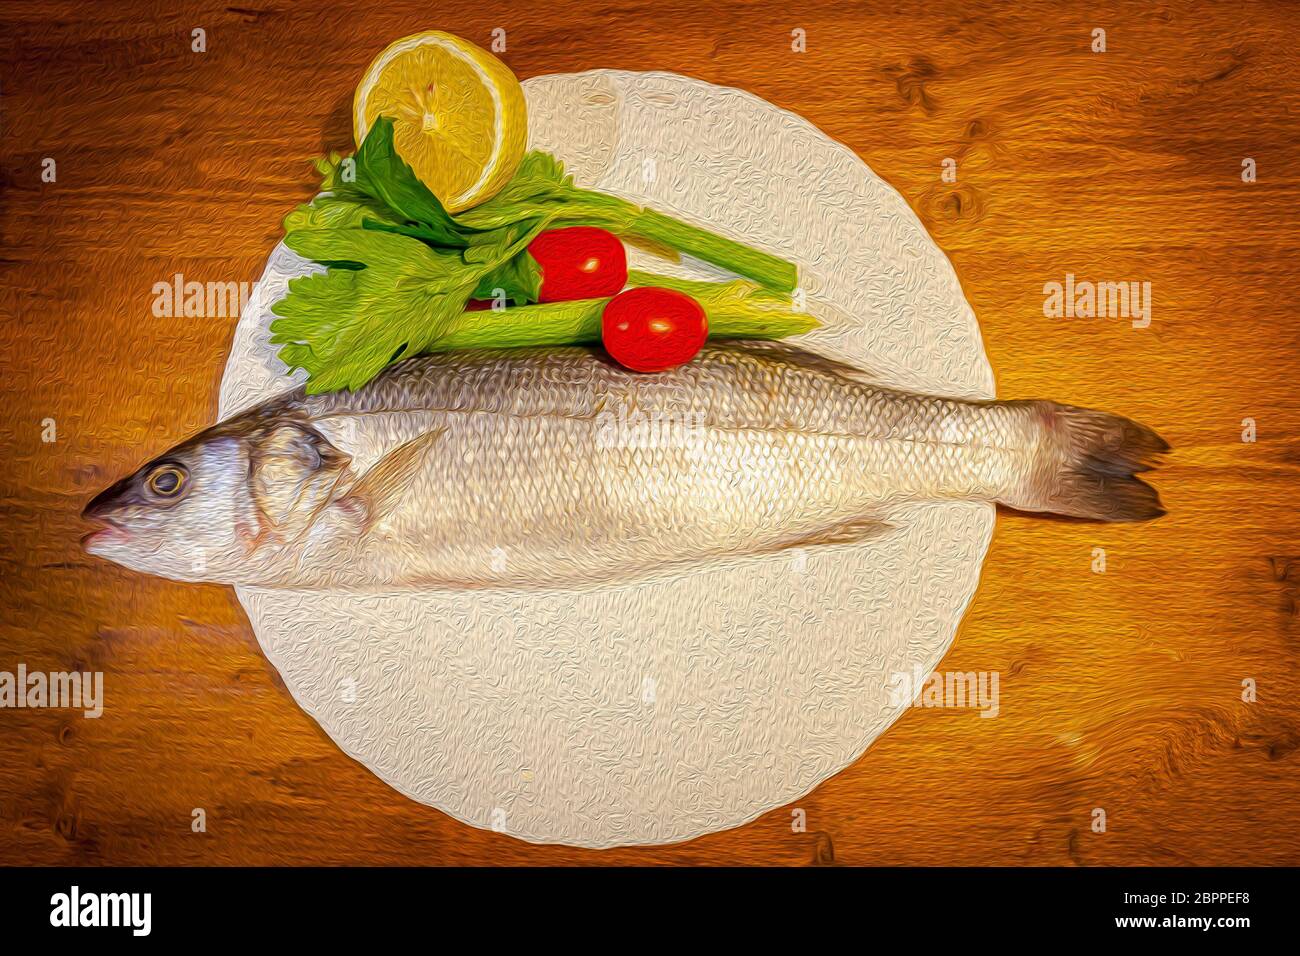 Oil painting effect of dish with sea bass, lemon, celery and tomatoes Stock Photo